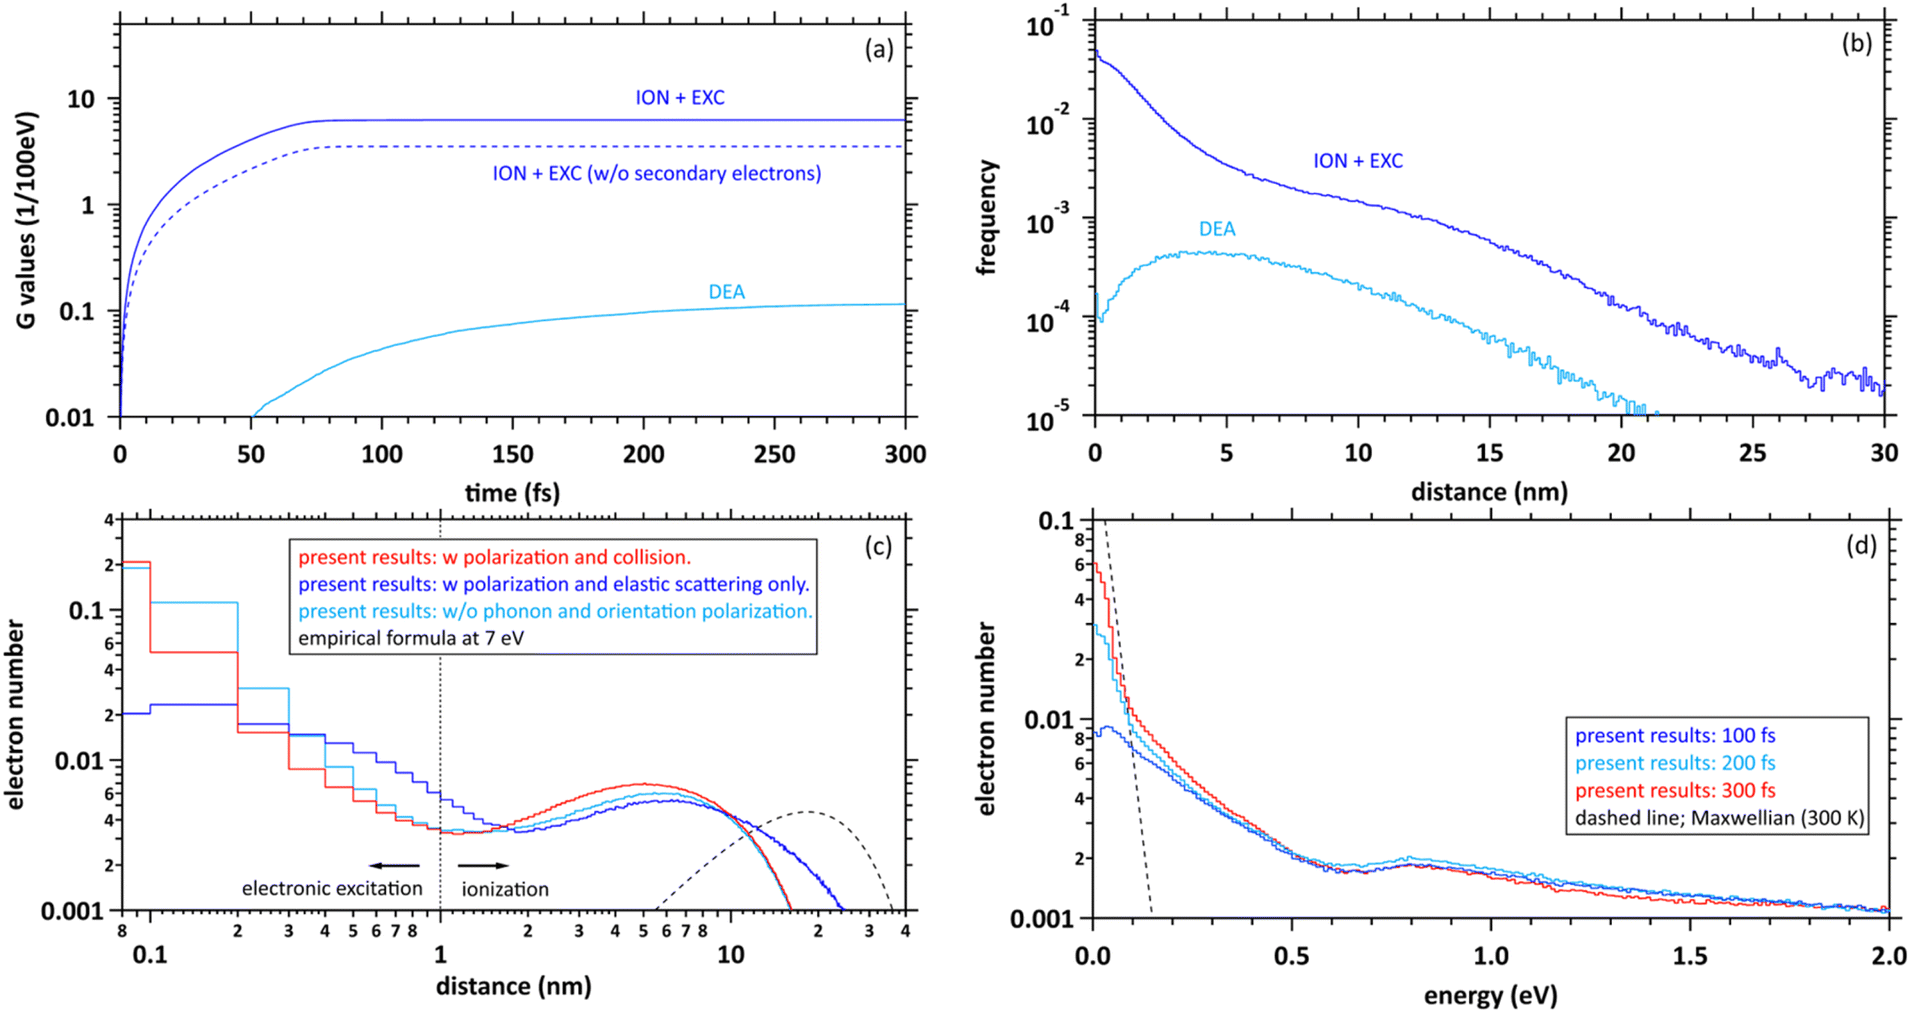 Initial Yield Of Hydrated Electron Production From Water Radiolysis Based On First Principles